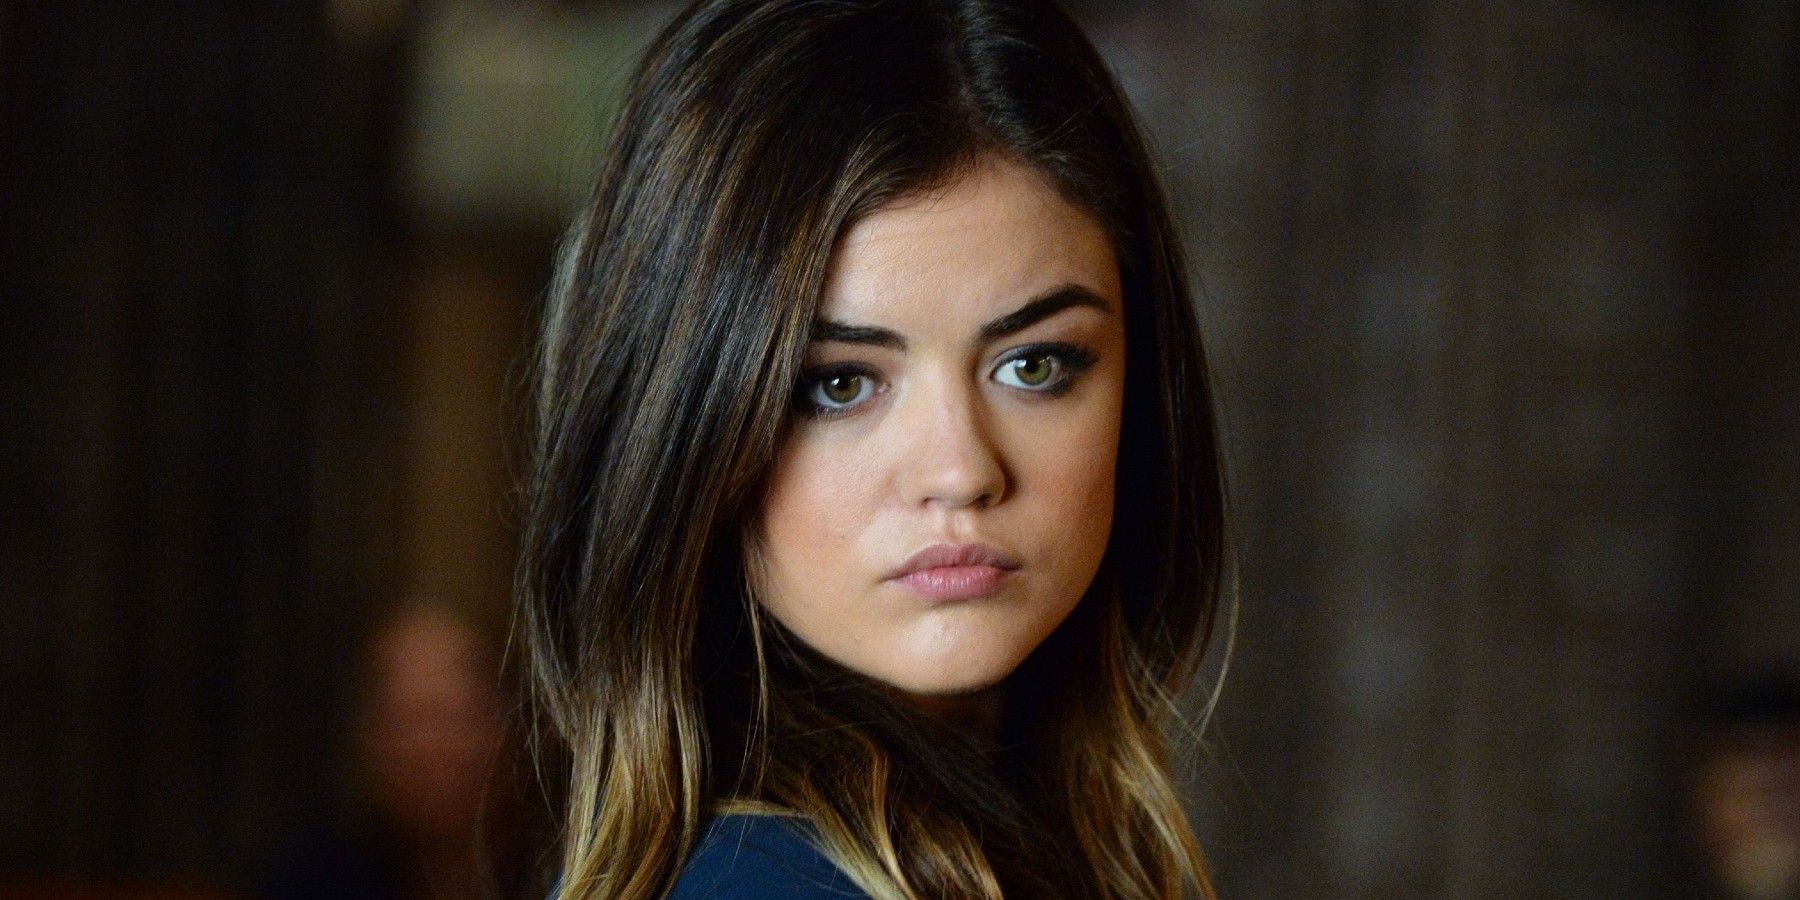 Pretty Little Liars: Summer School': Cast, Plot, and Everything We